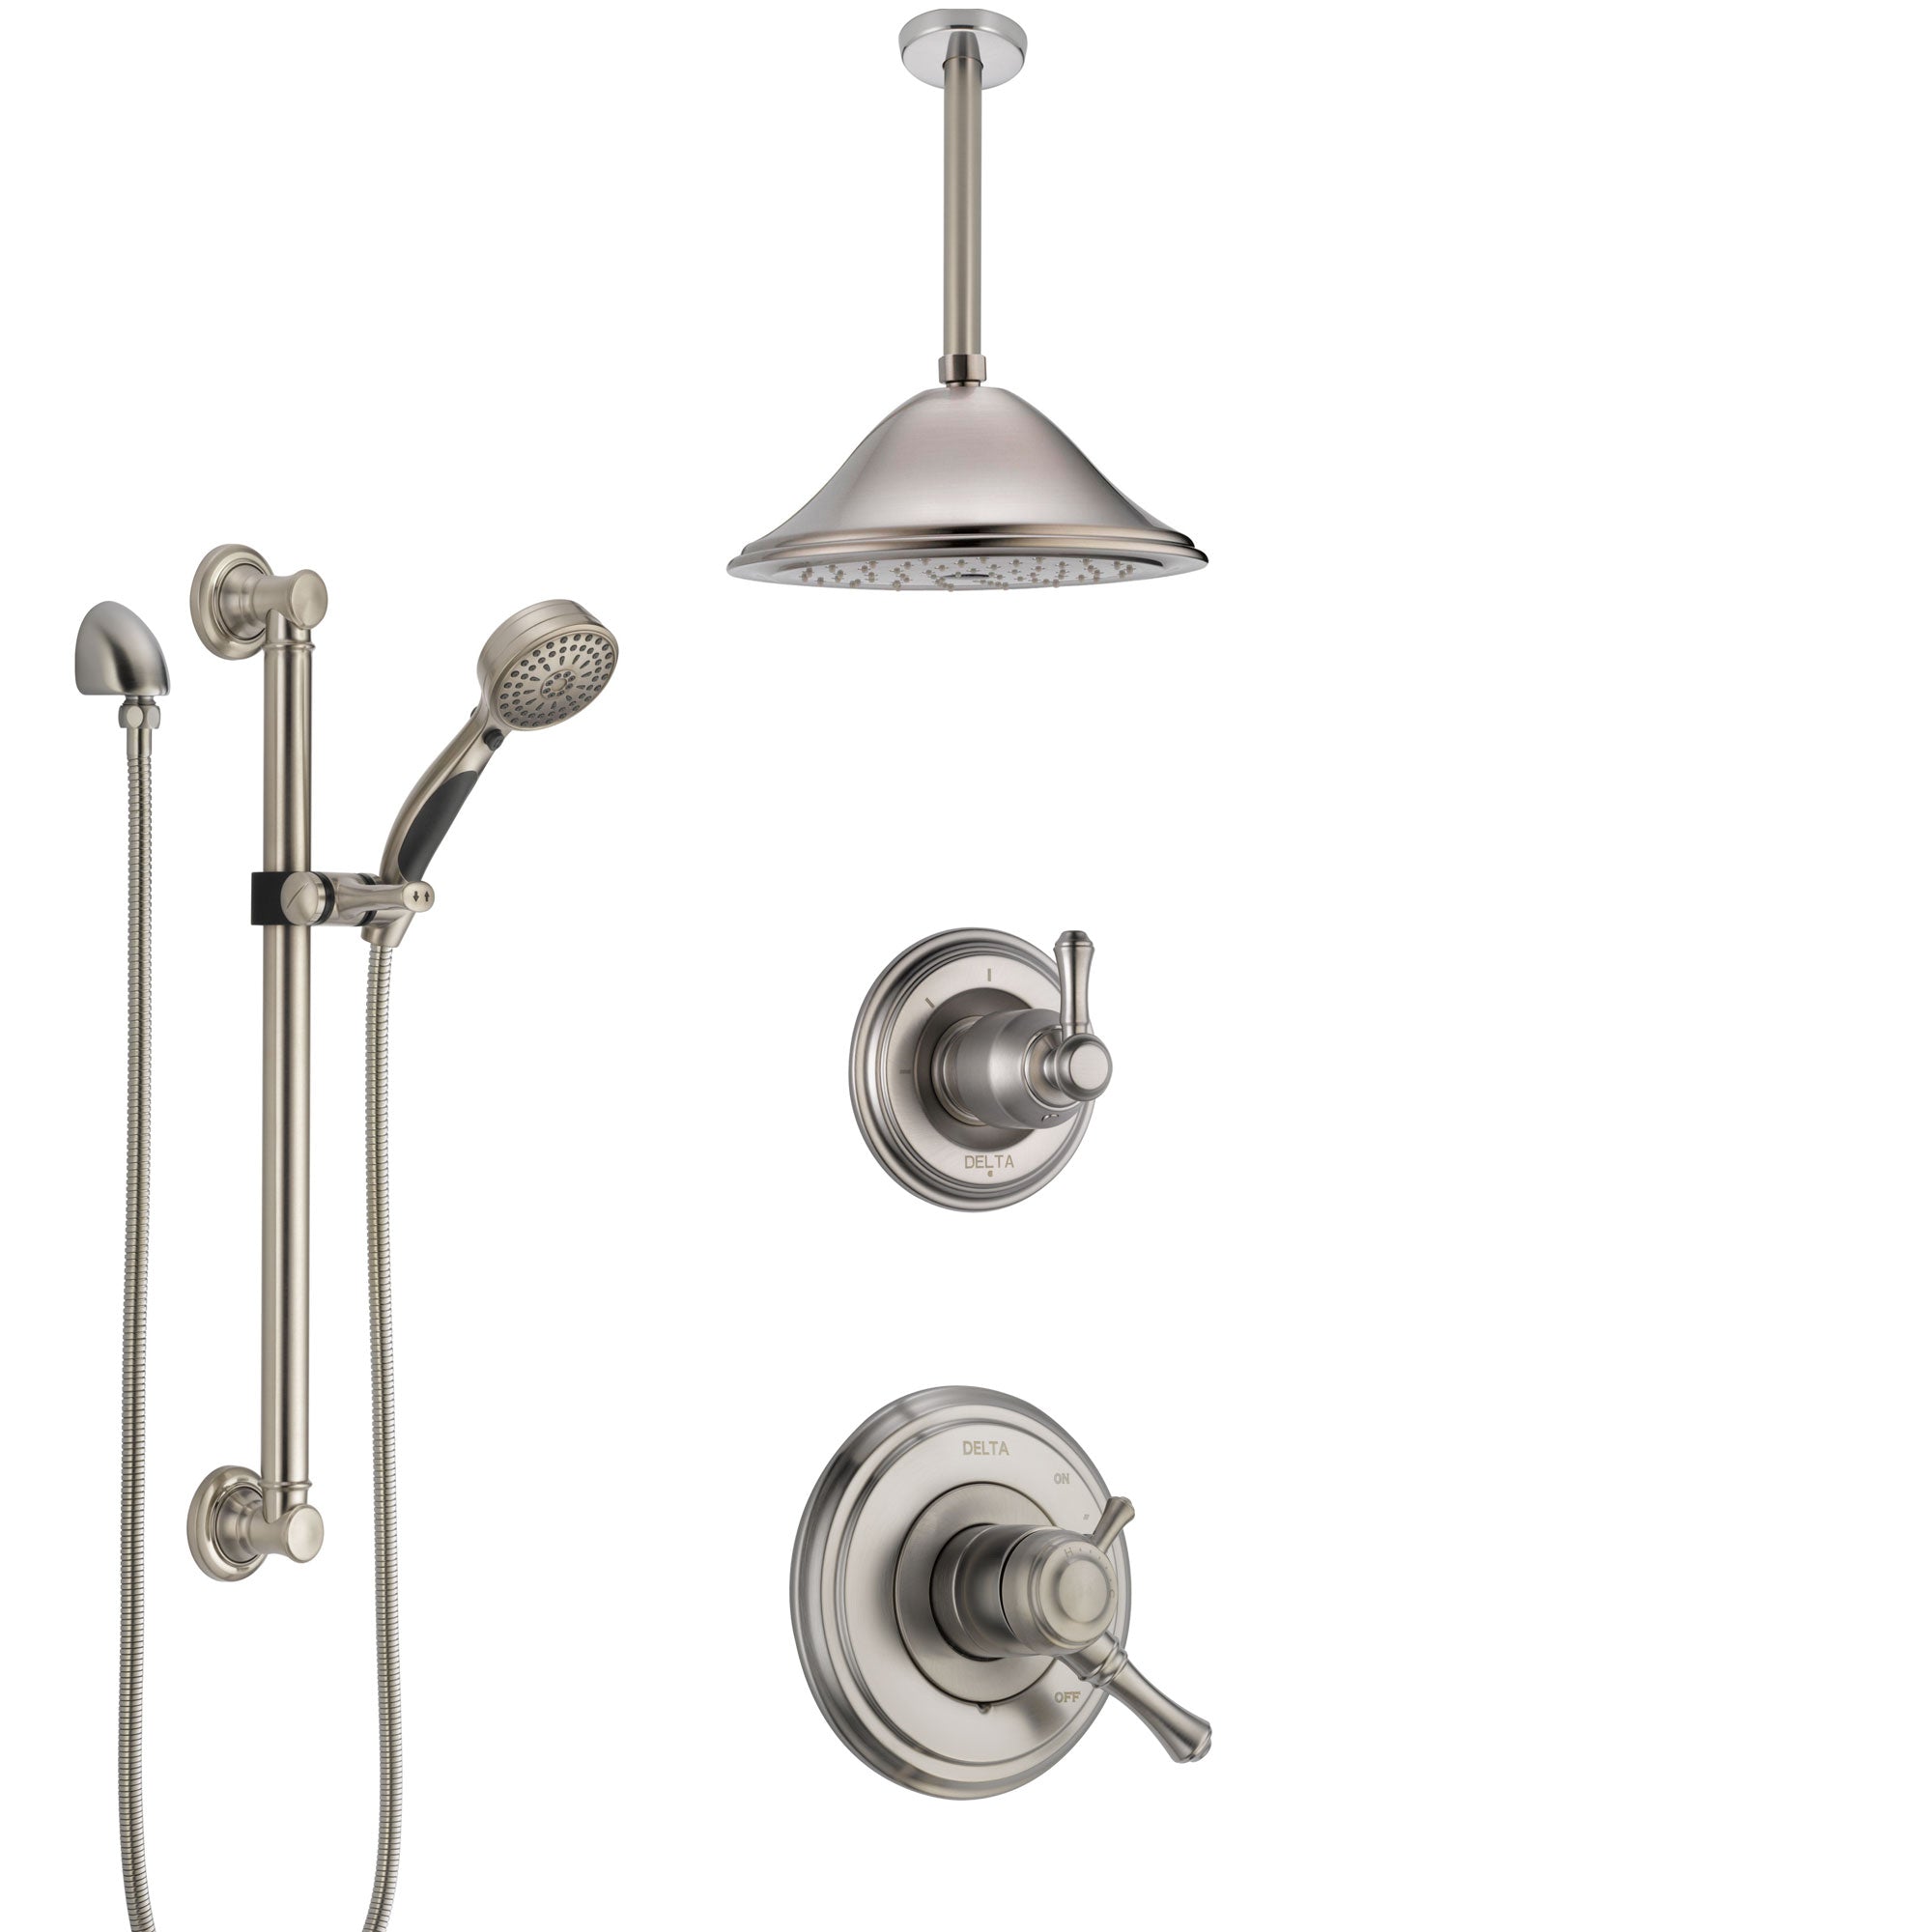 Delta Cassidy Dual Control Handle Stainless Steel Finish Shower System, Diverter, Ceiling Mount Showerhead, and Hand Shower with Grab Bar SS1797SS5